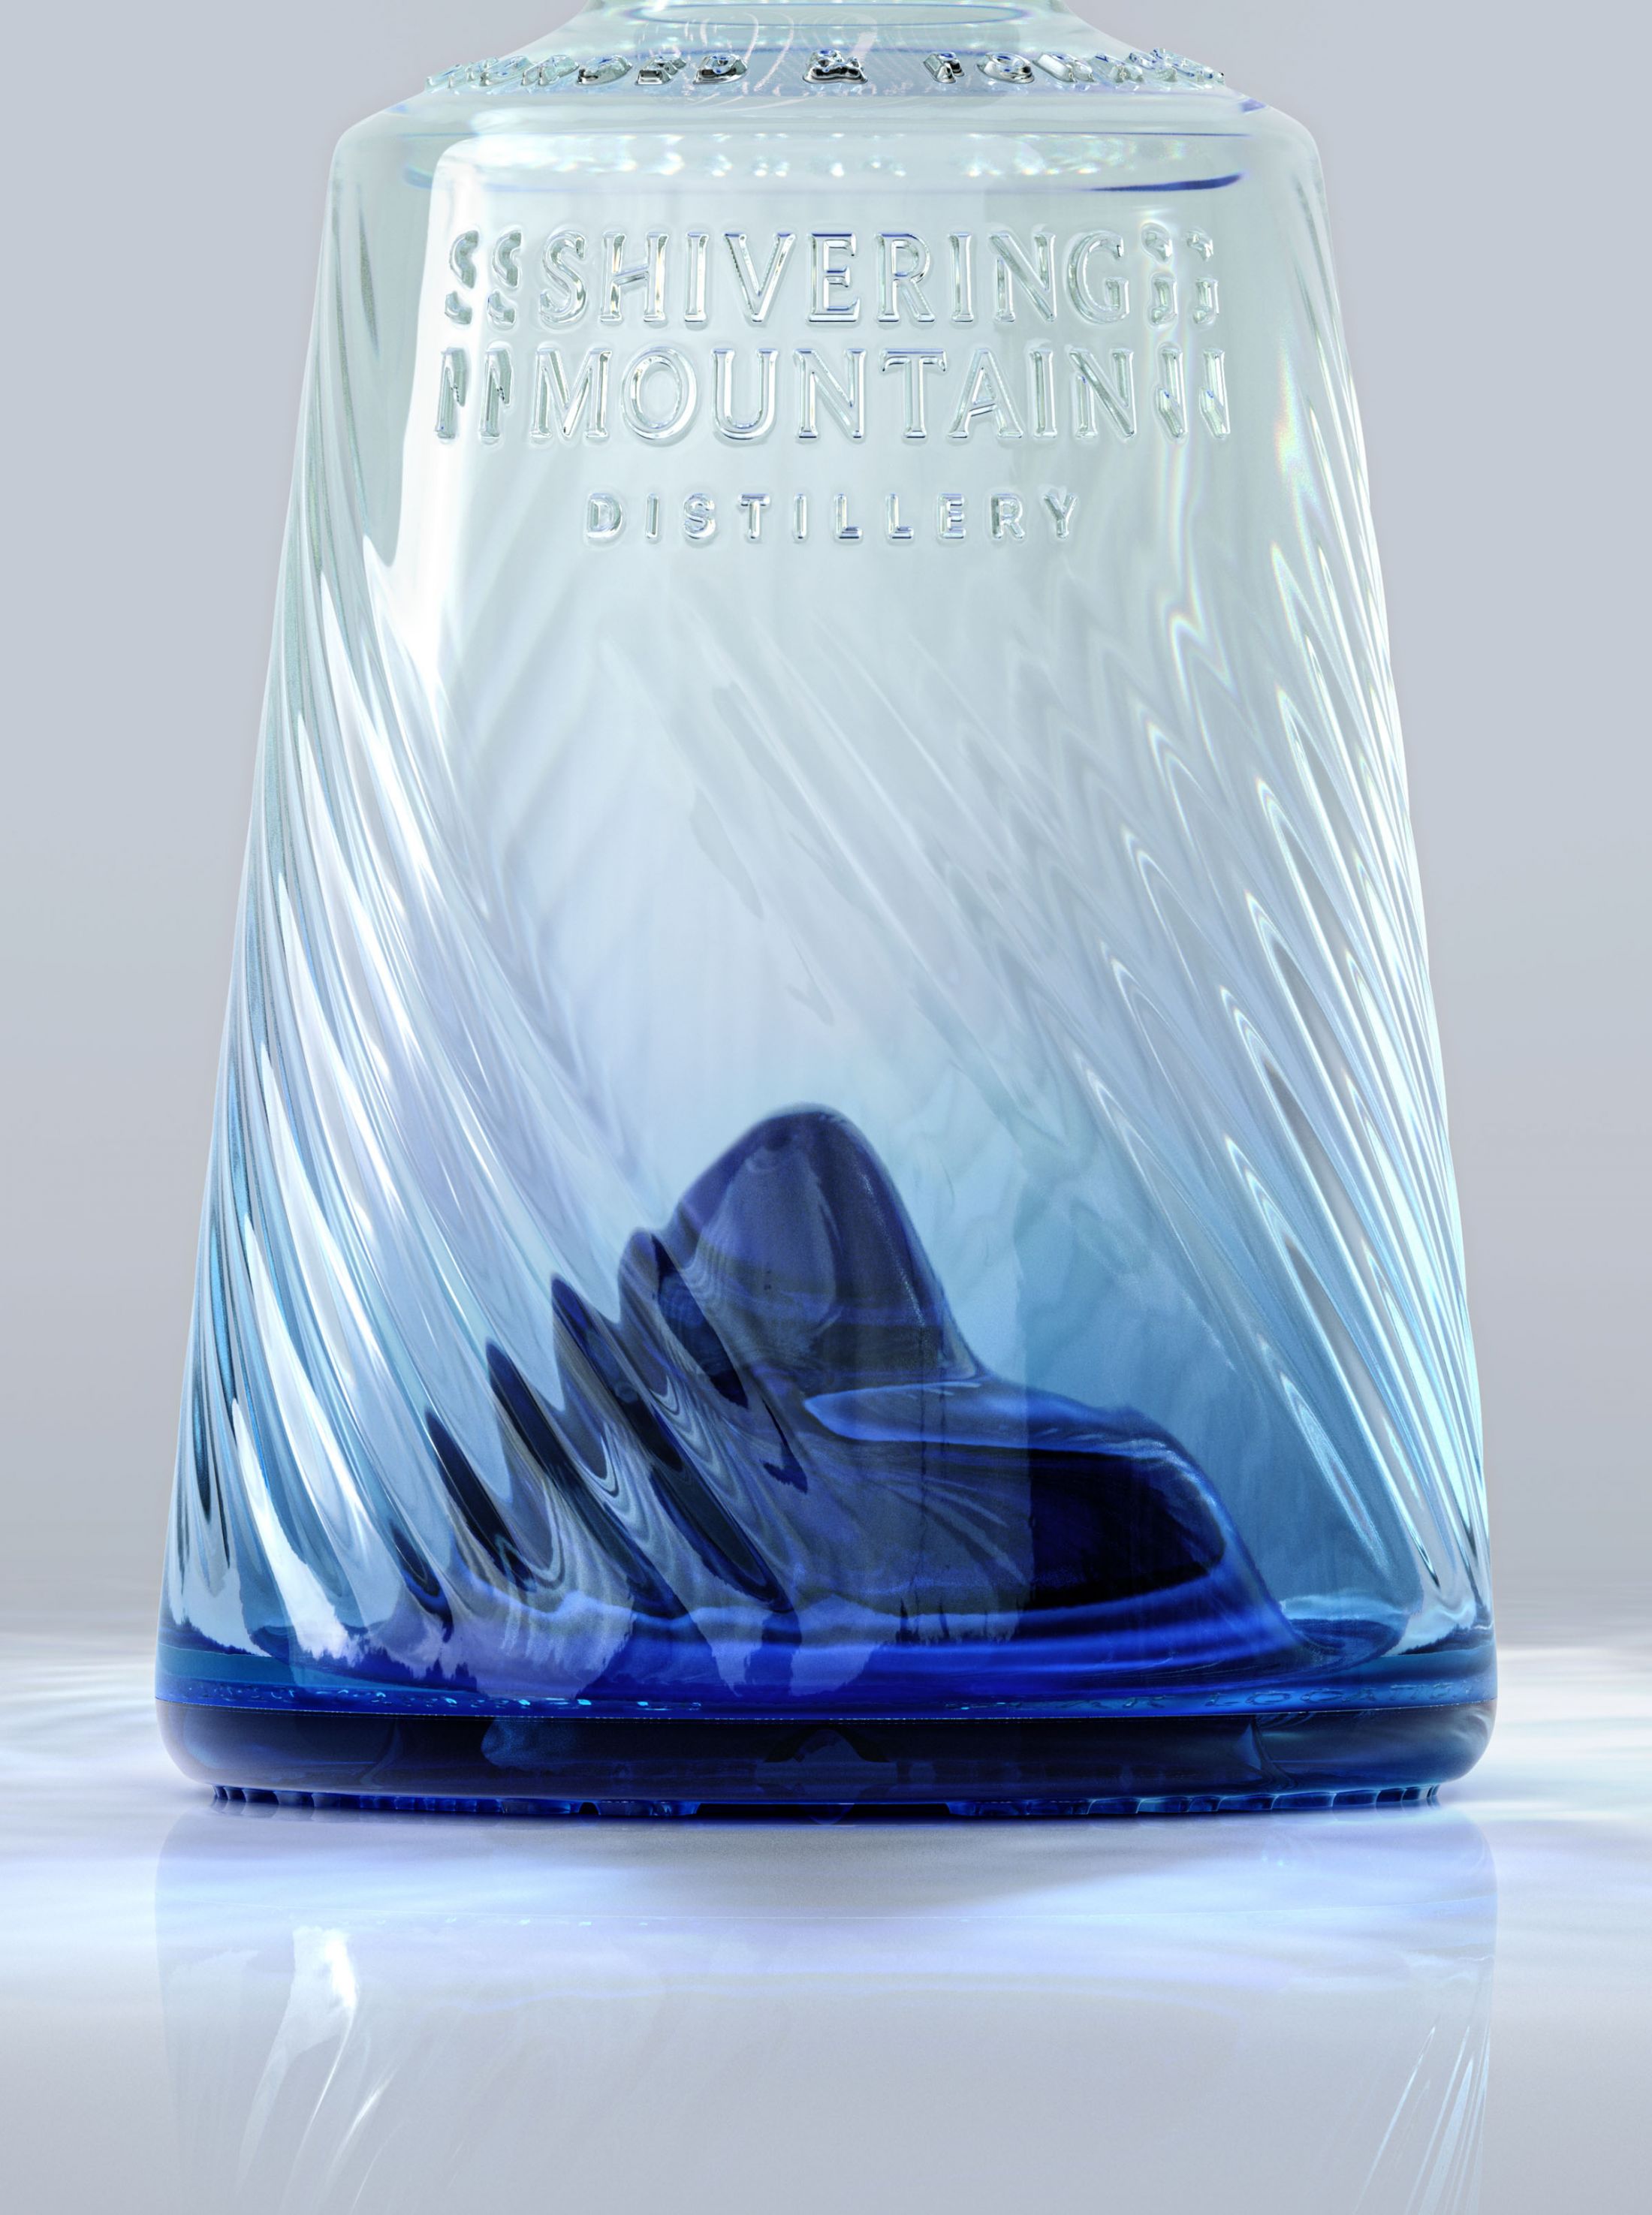 The incredible design and history of the Shivering Mountain gin bottle